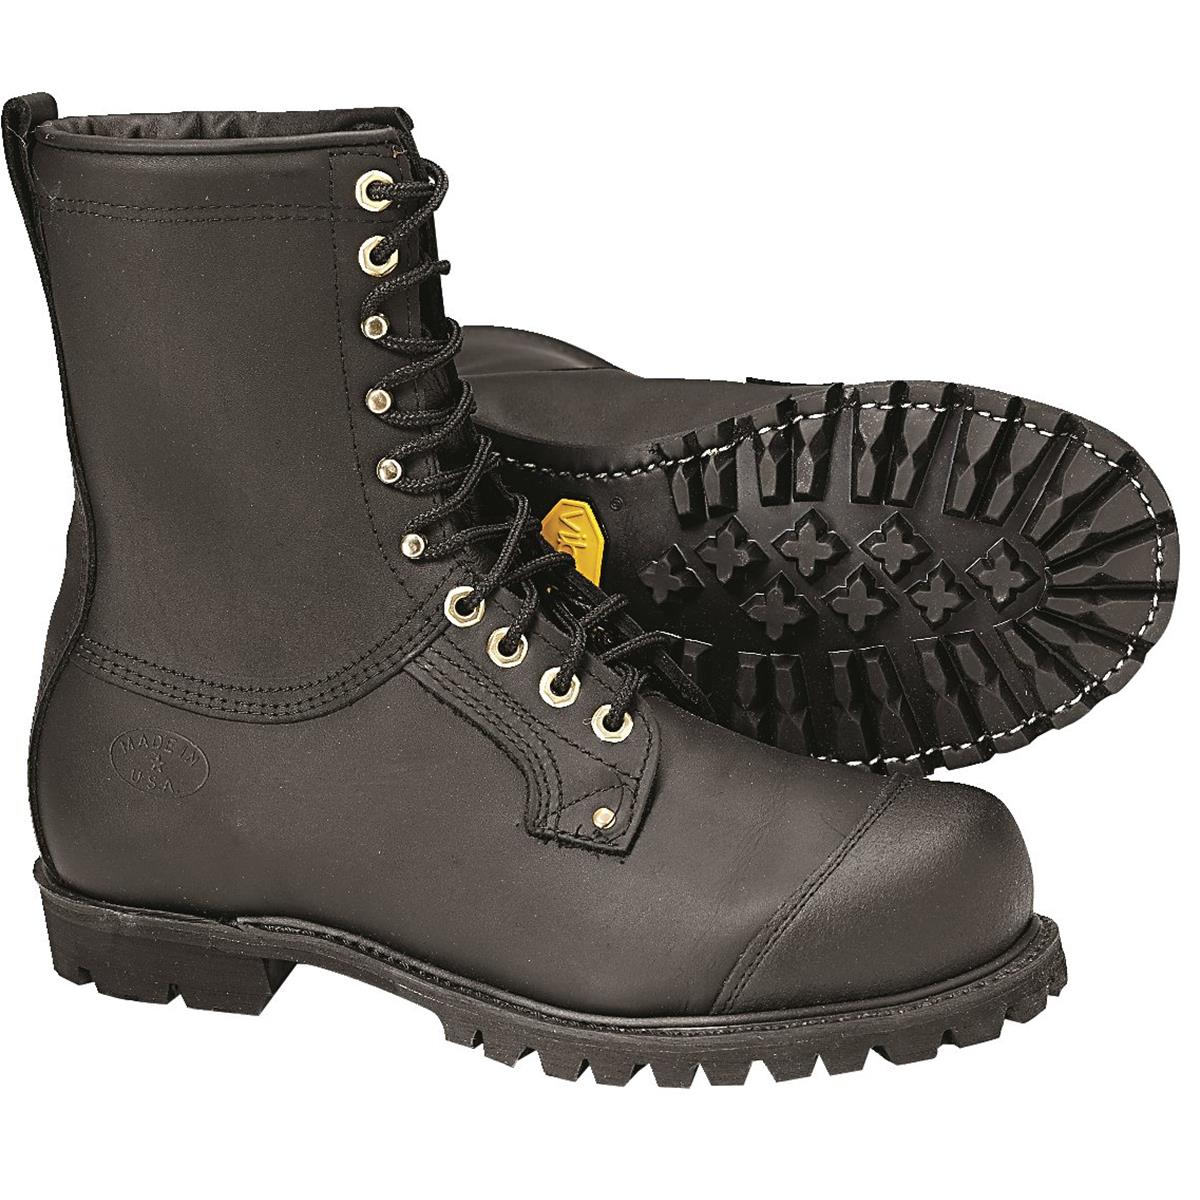 SwedePro Chain Saw Protective Leather Boots | CSP Forestry